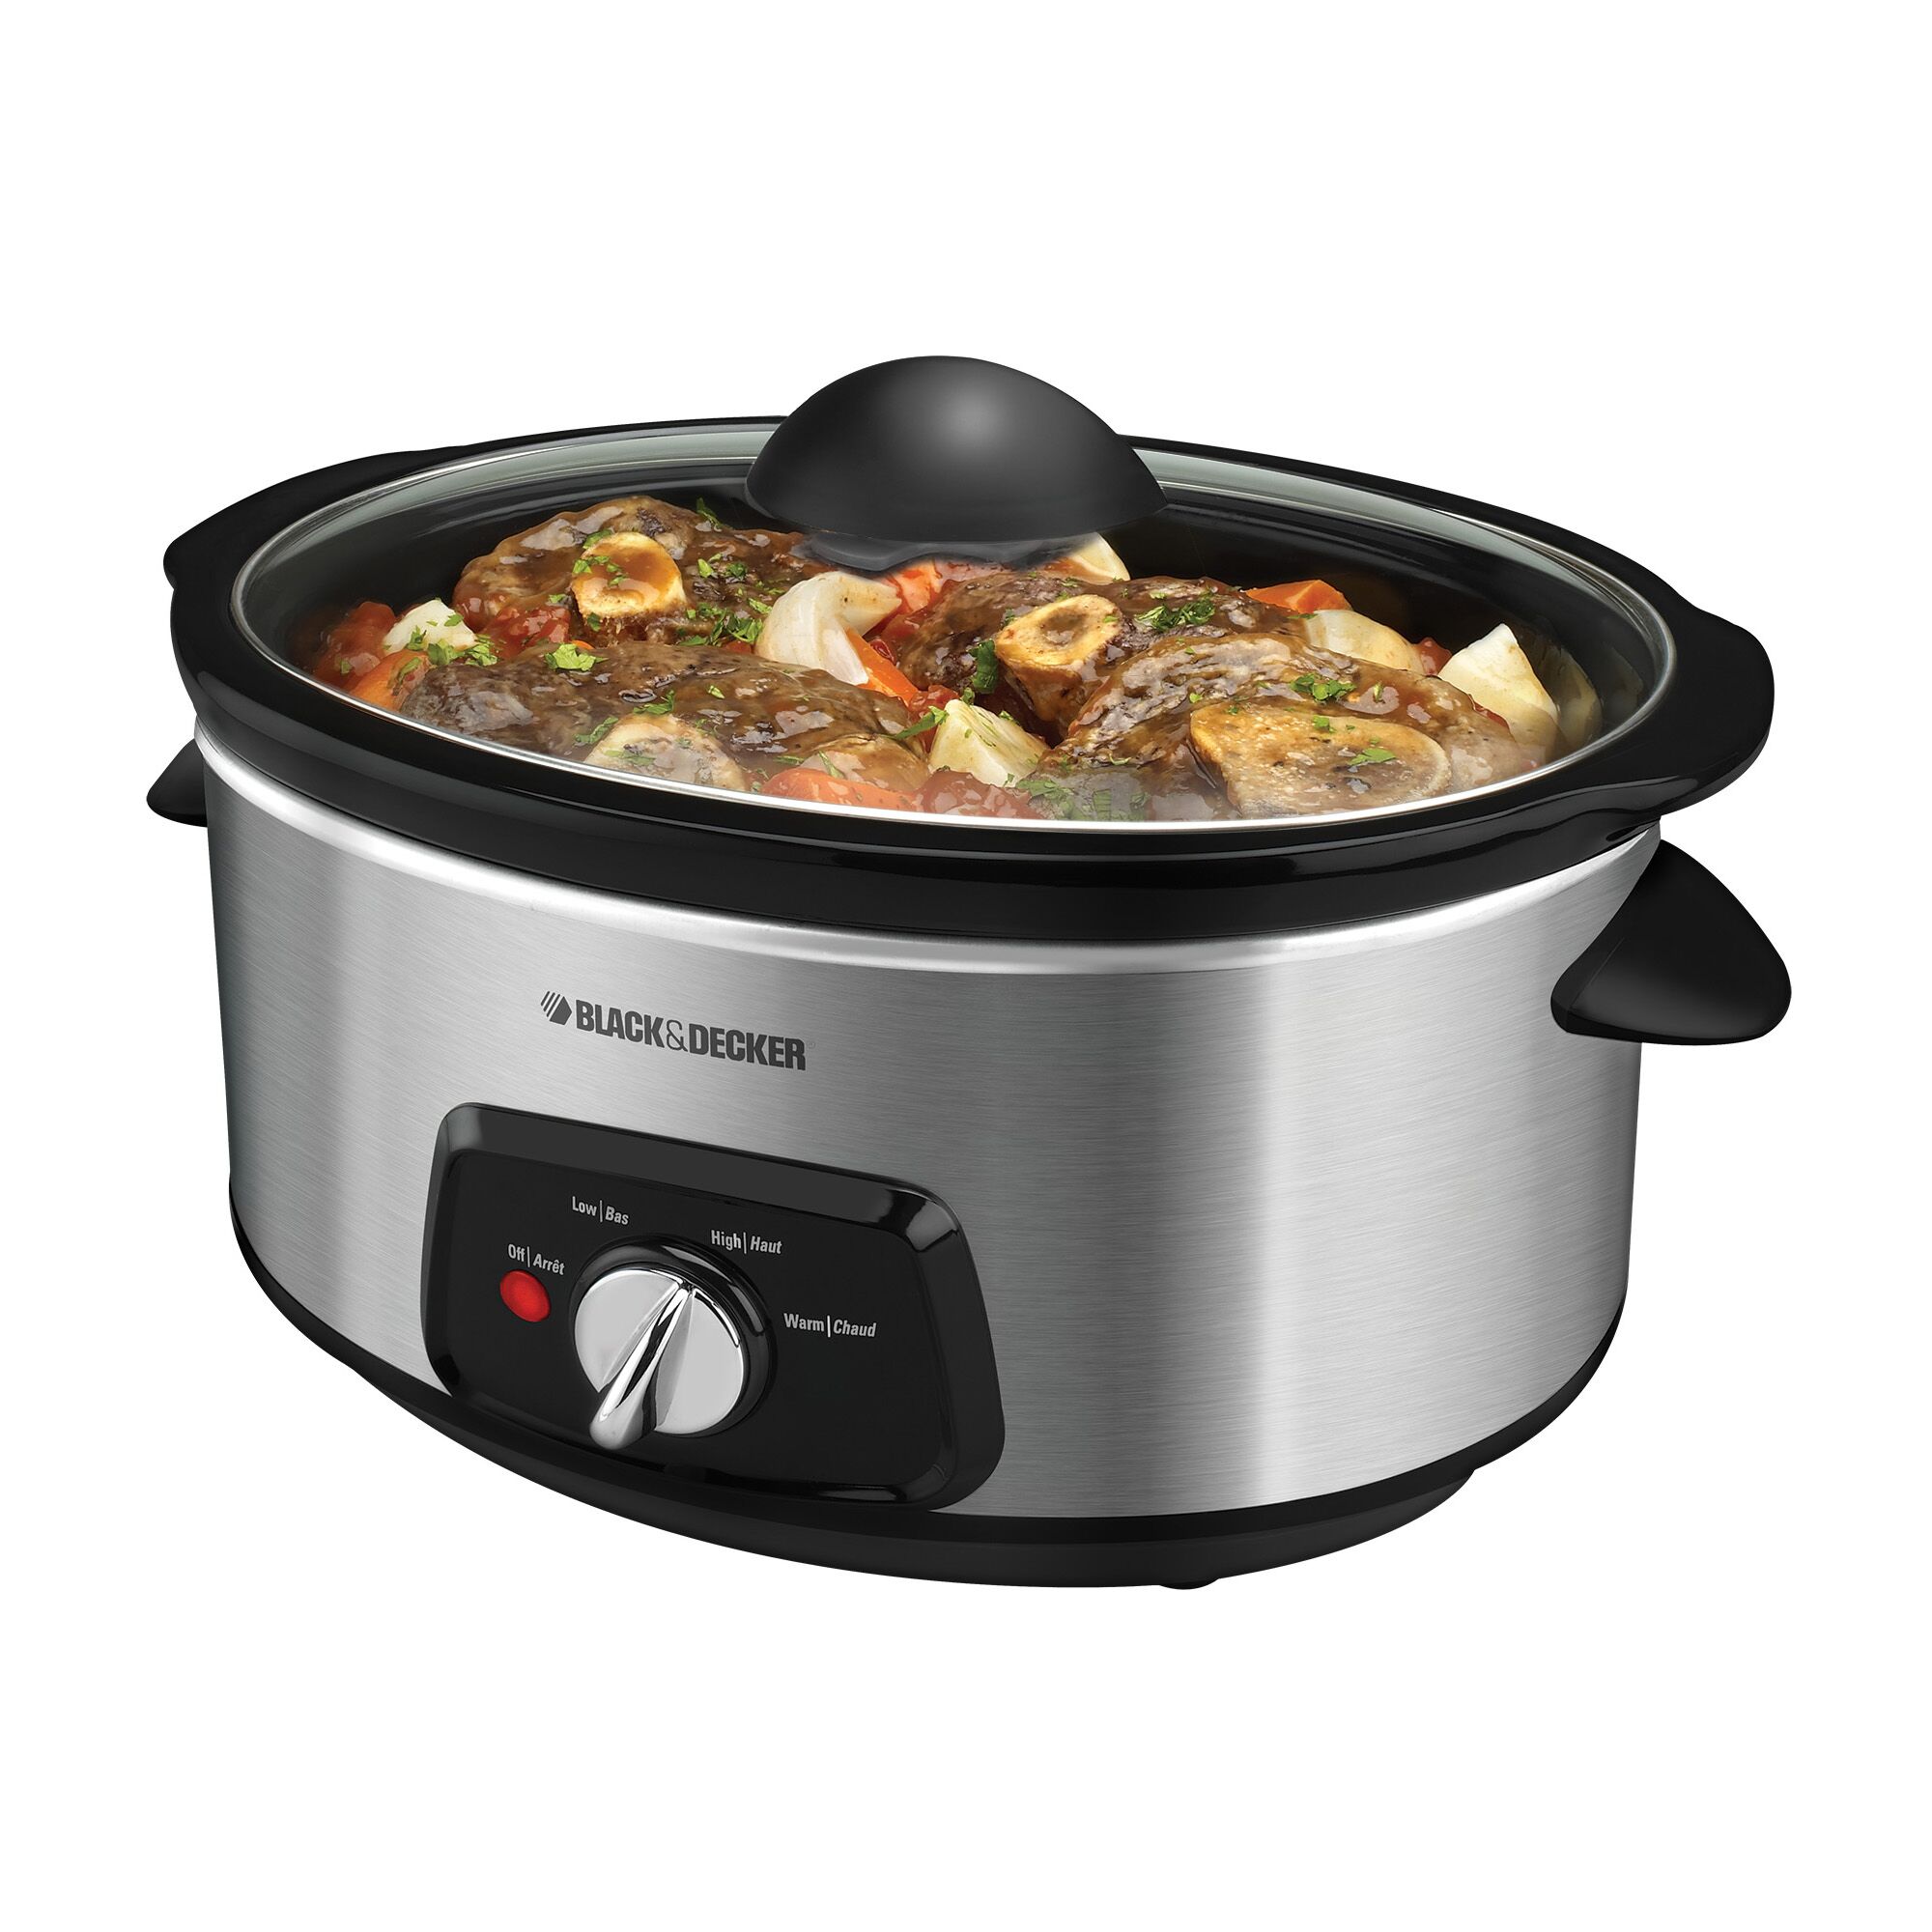 Stainless steel slow cooker.